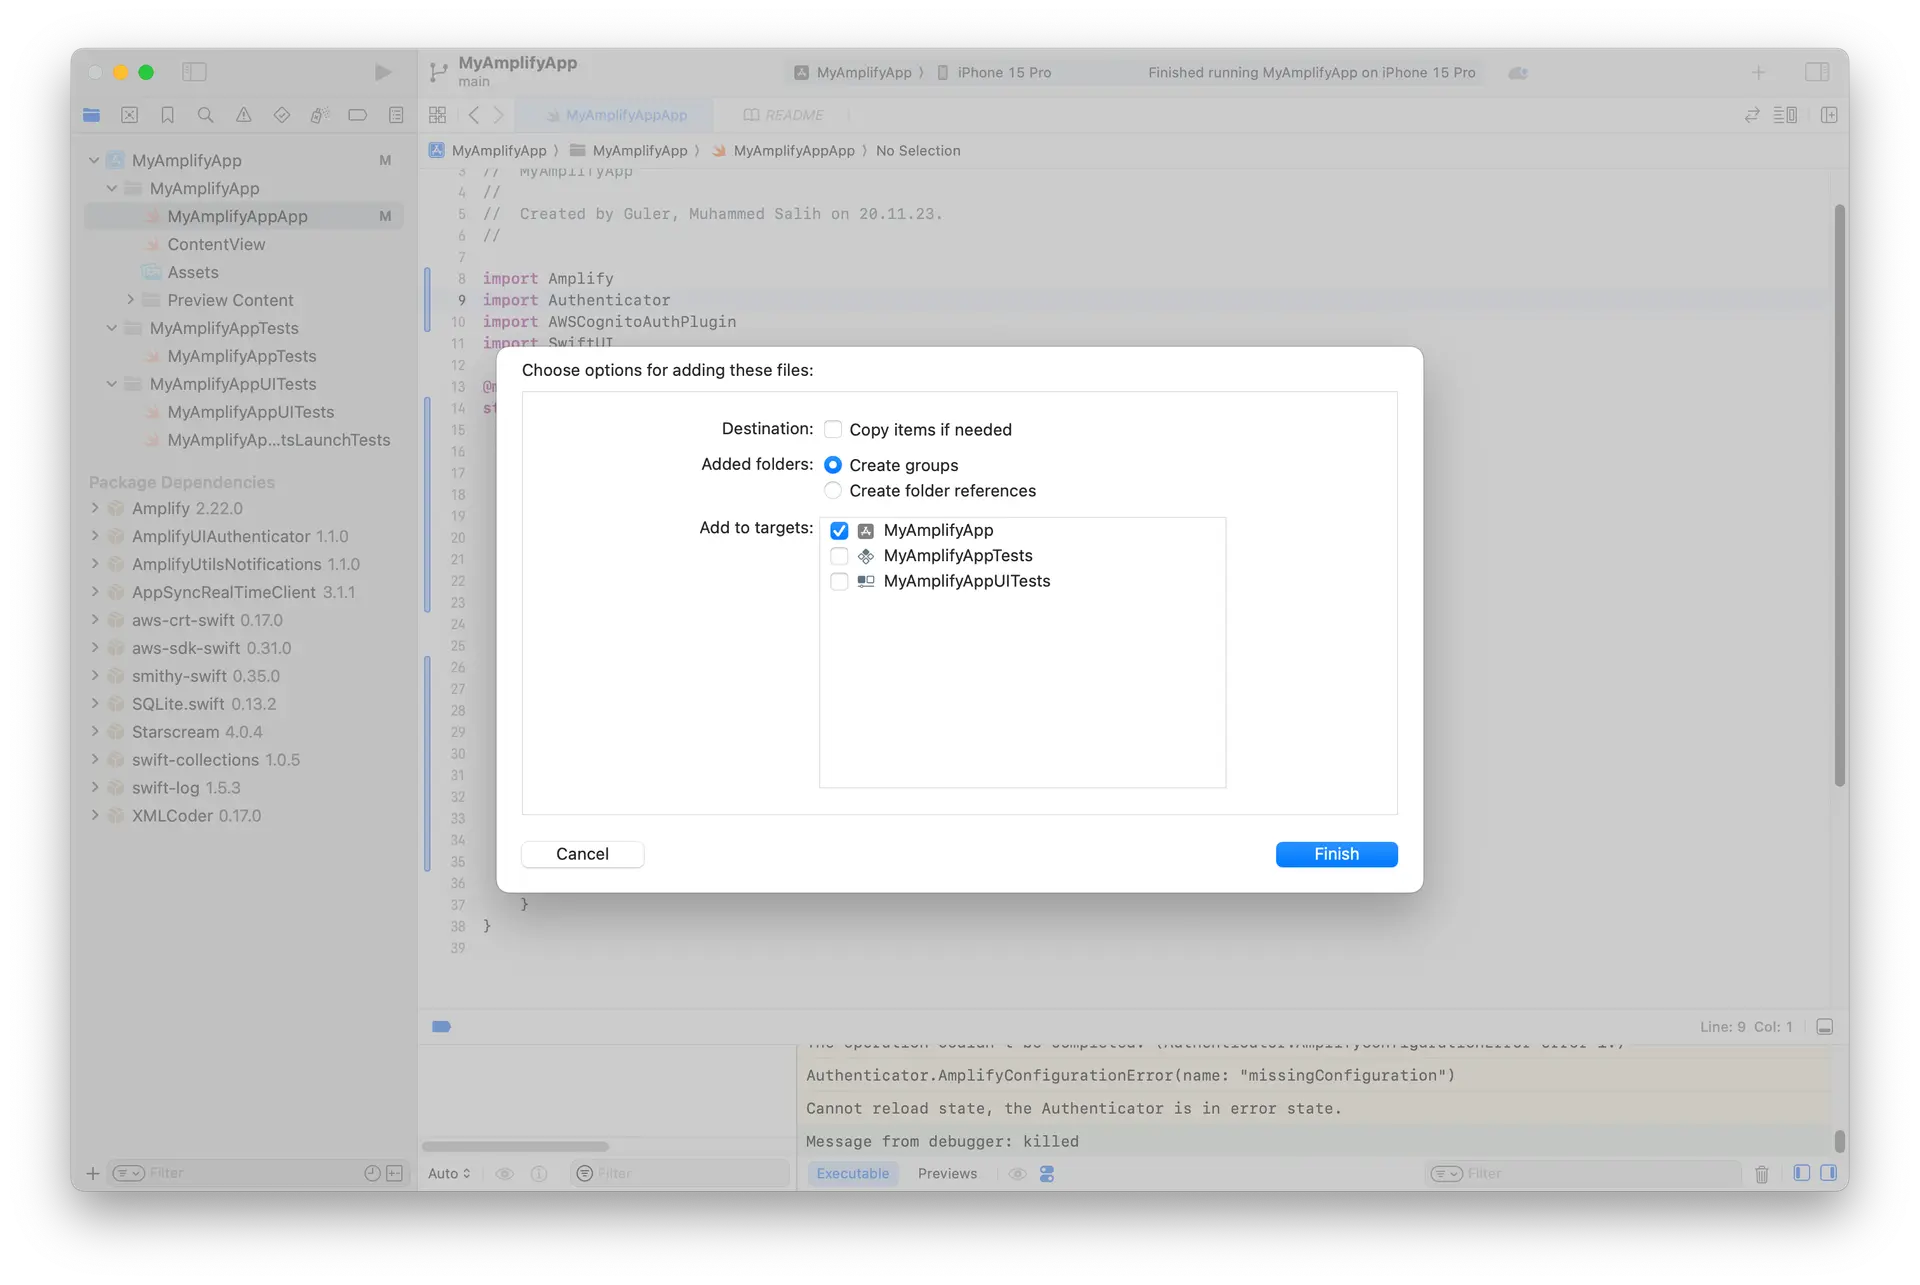 Dialog appears when users drag and drop the generated files into Xcode. It displays targets, added folders, and destination options. The default settings should be sufficient for drag and drop.